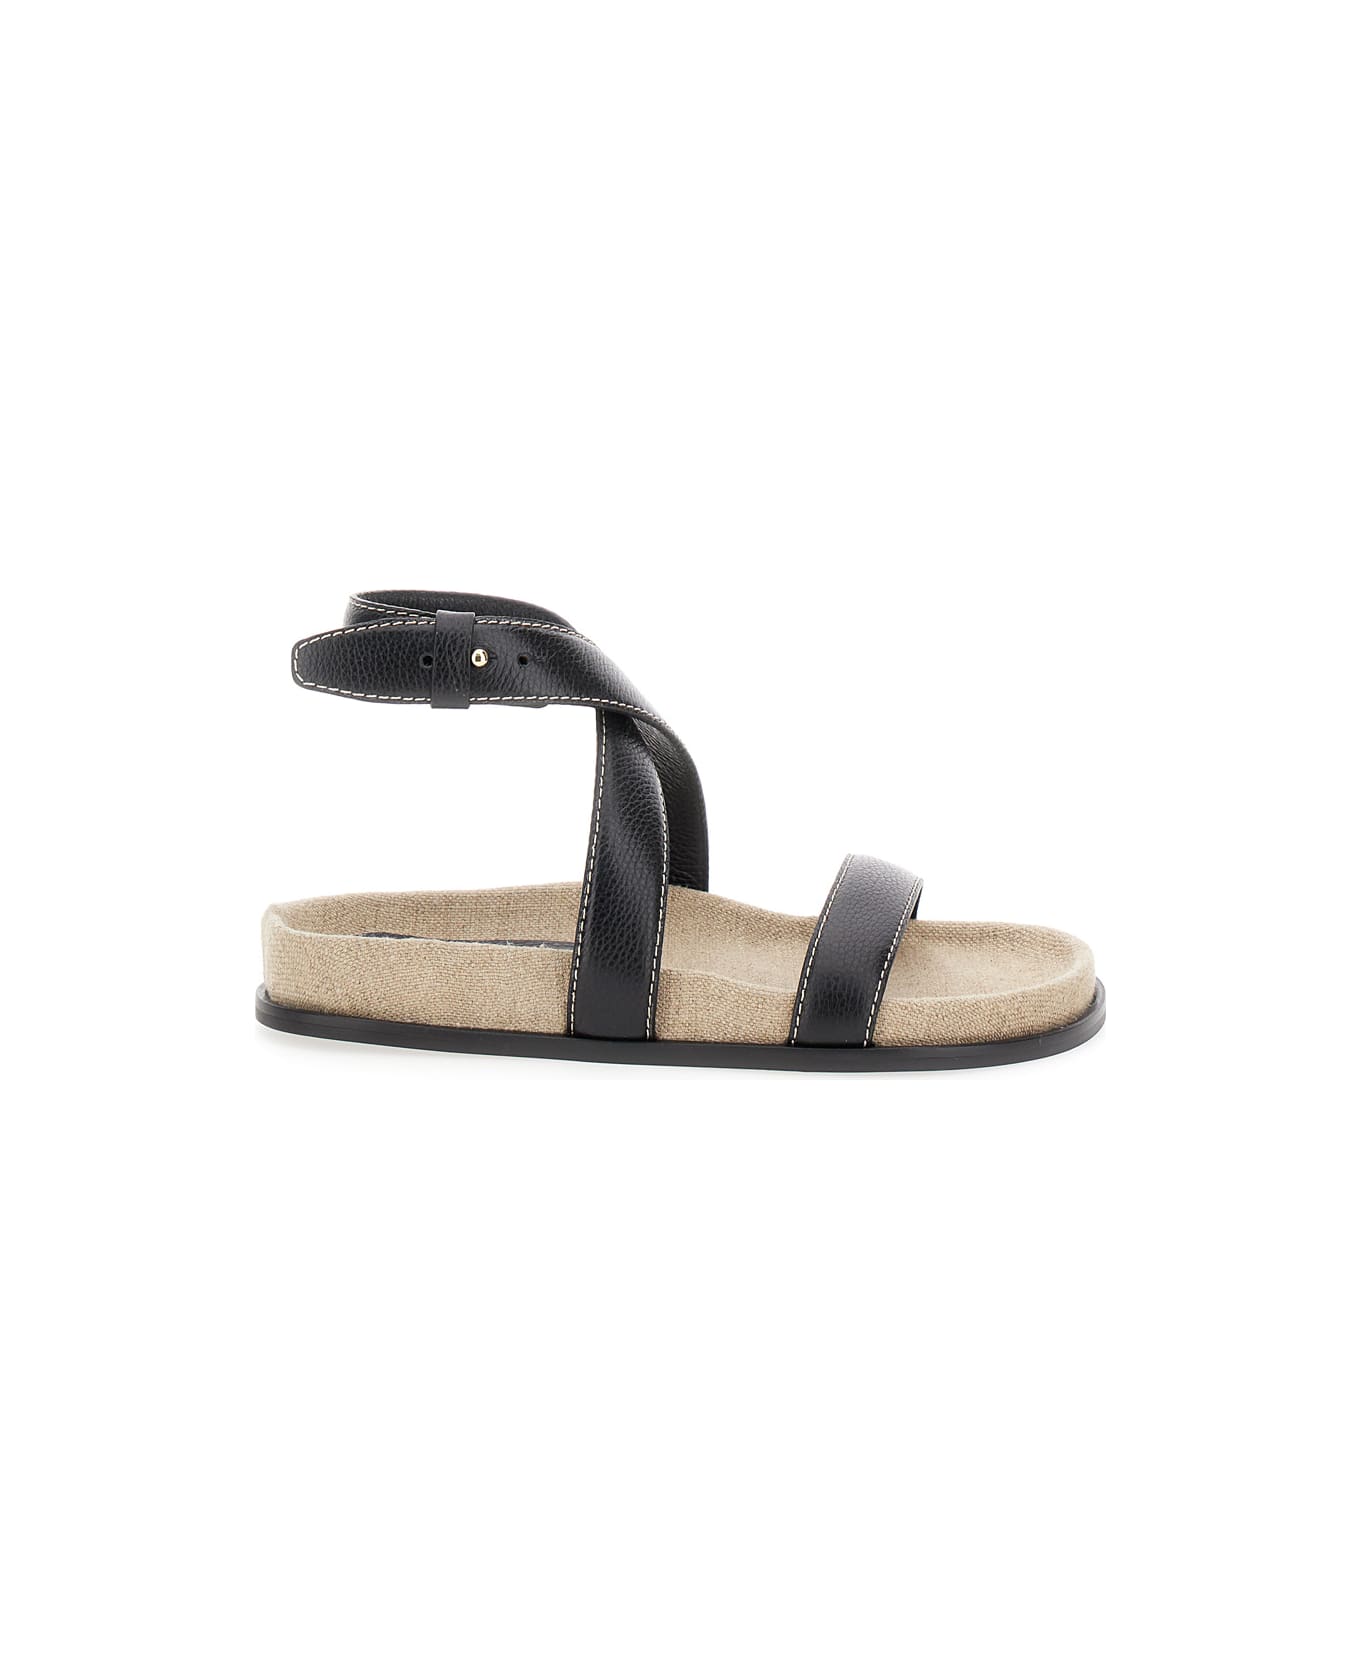 Totême 'the Chunky' Black Sandals With Straps In Leather Woman - Black サンダル